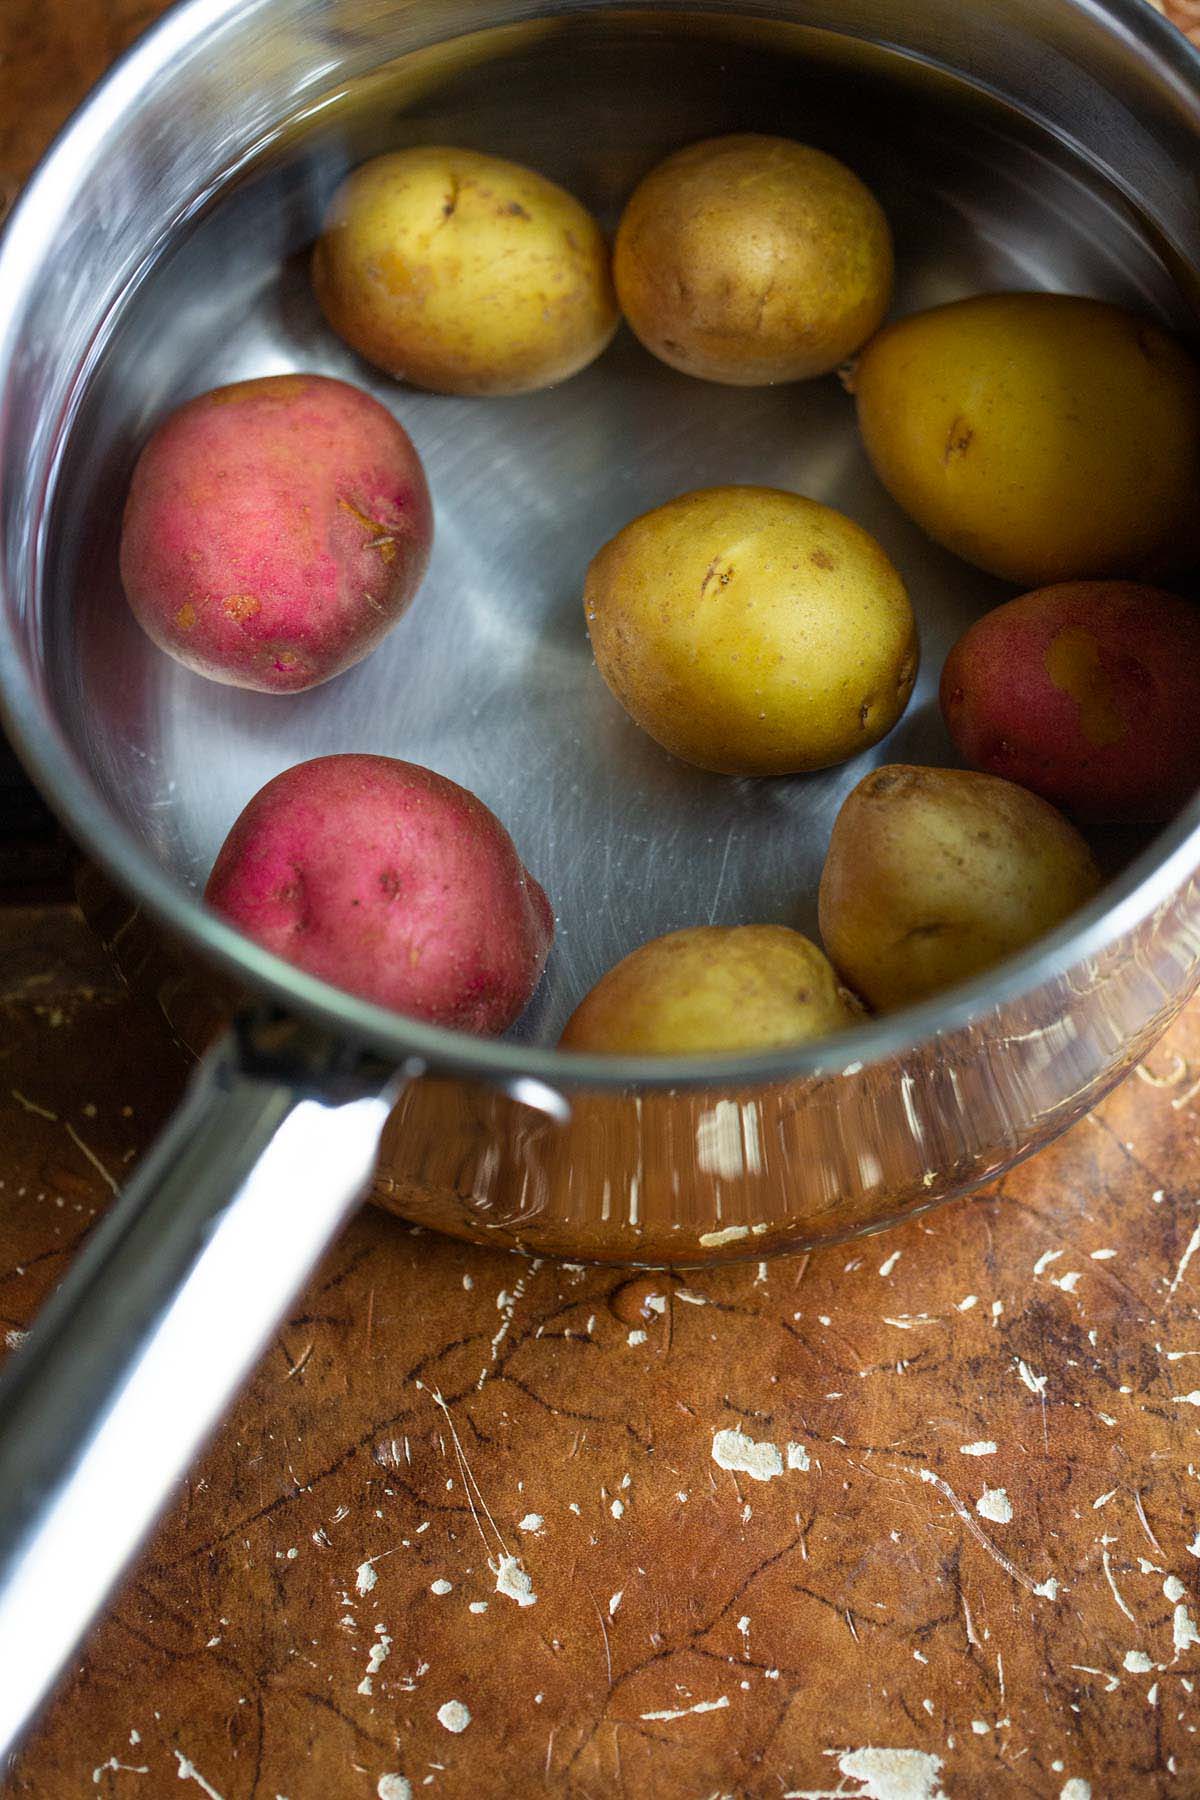 Potatoes in a pot with water.